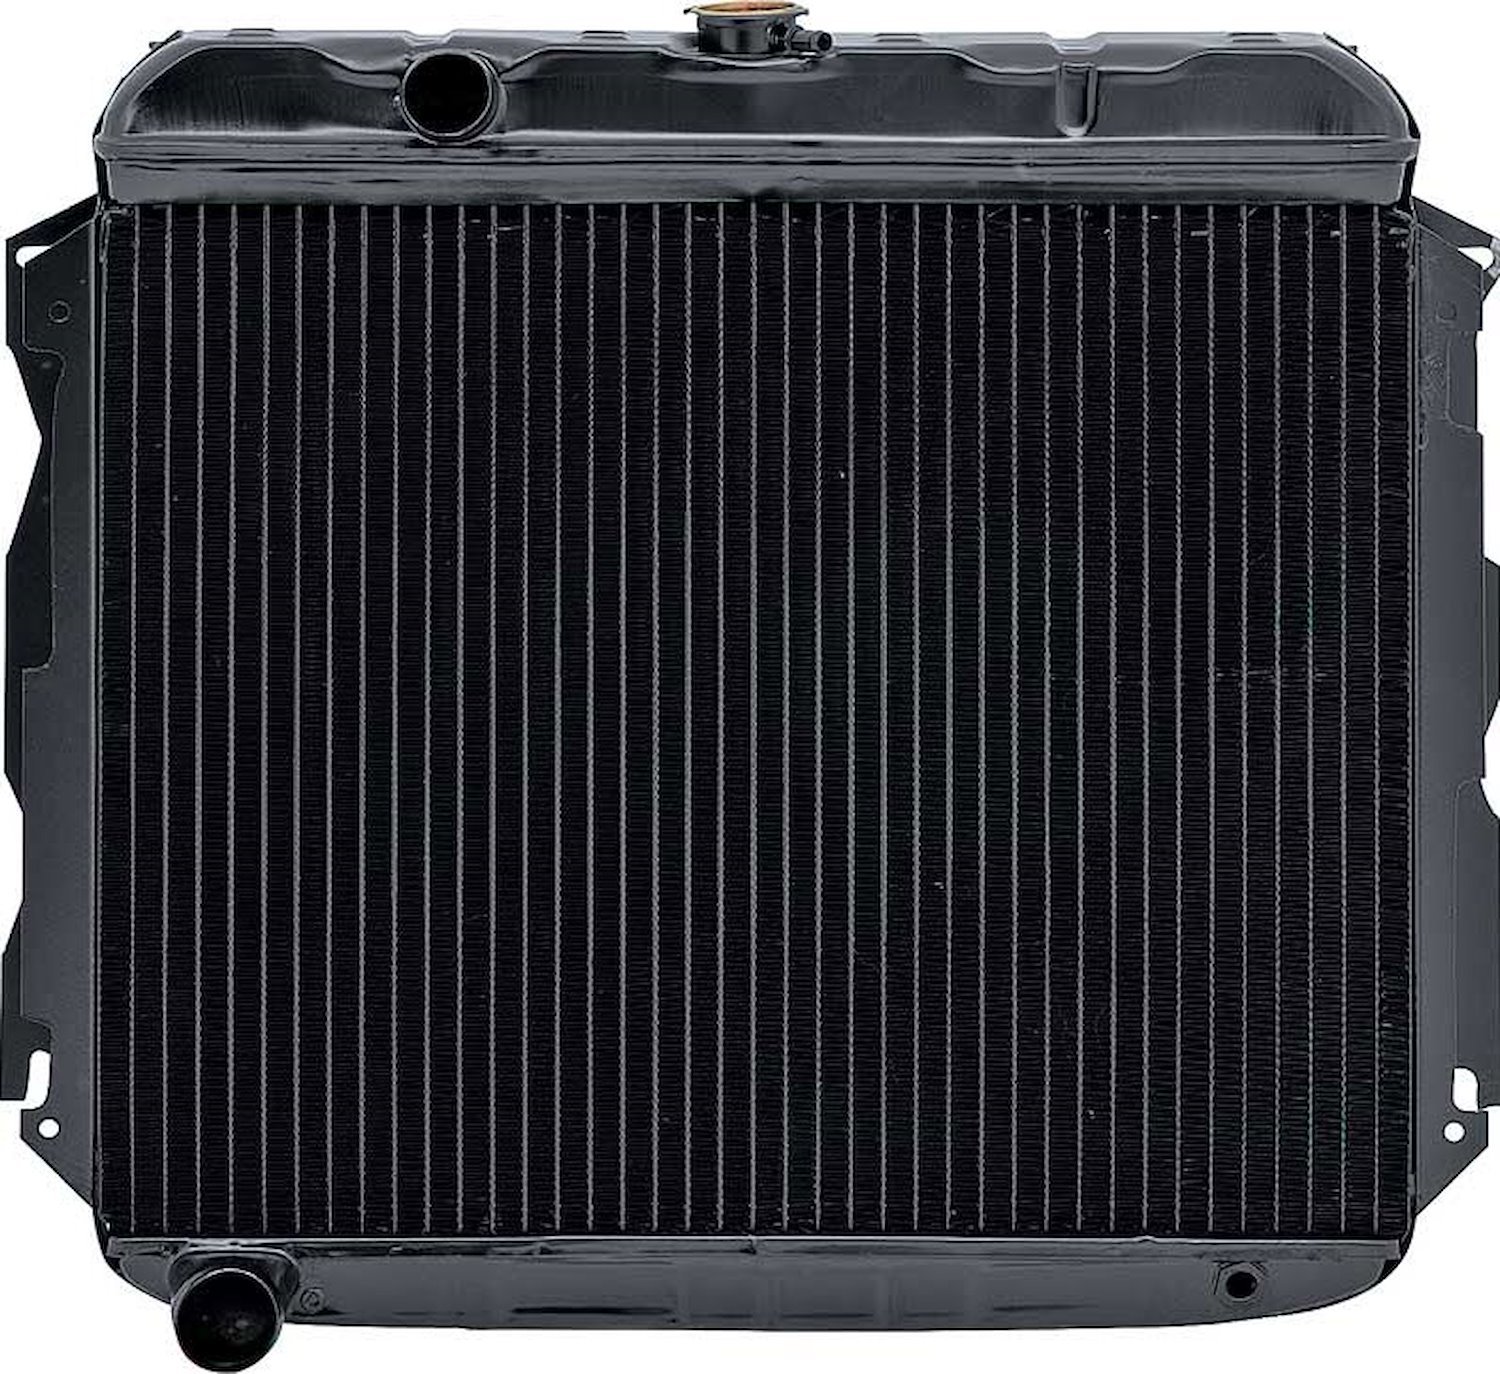 MB2382A Replacement Radiator 1966-69 Mopar B-Body Big Block V8 (Exc Hemi) With Auto Trans 4 Row 22" Wide